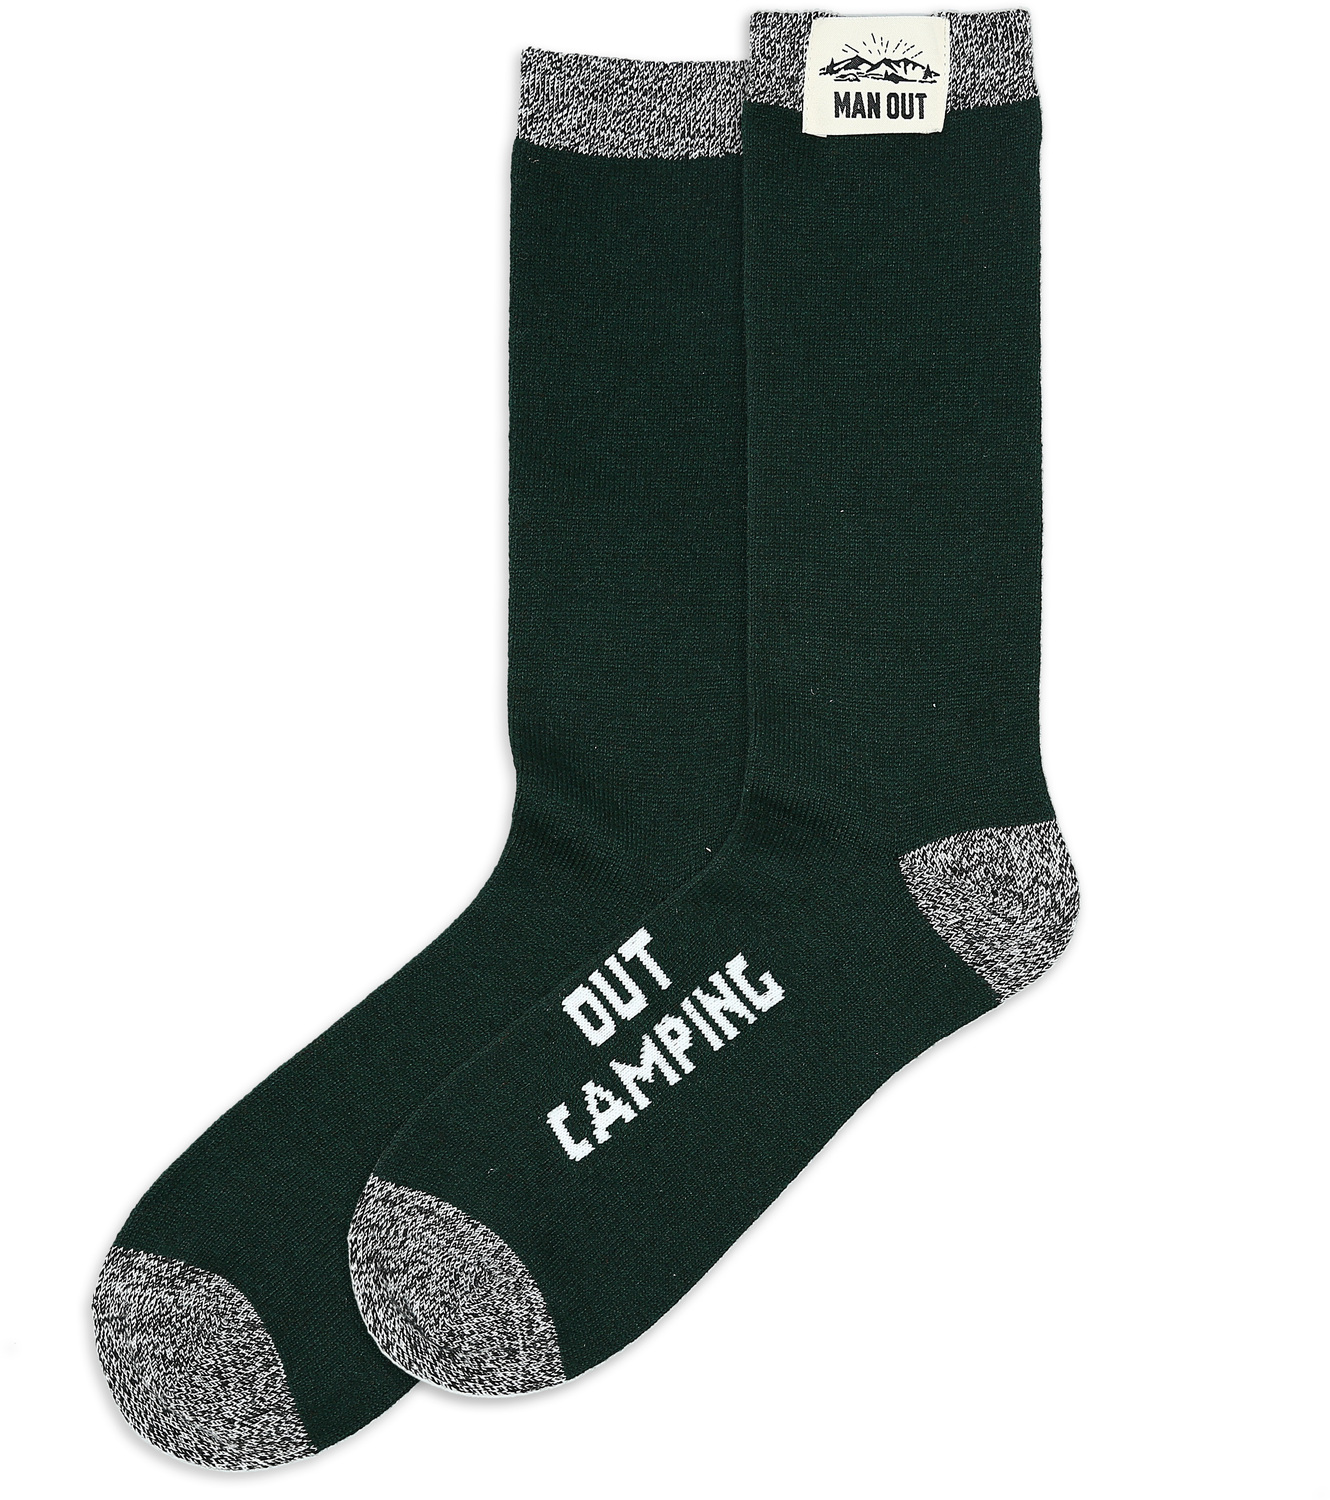 Out Camping by Man Out - Out Camping - Men's Socks